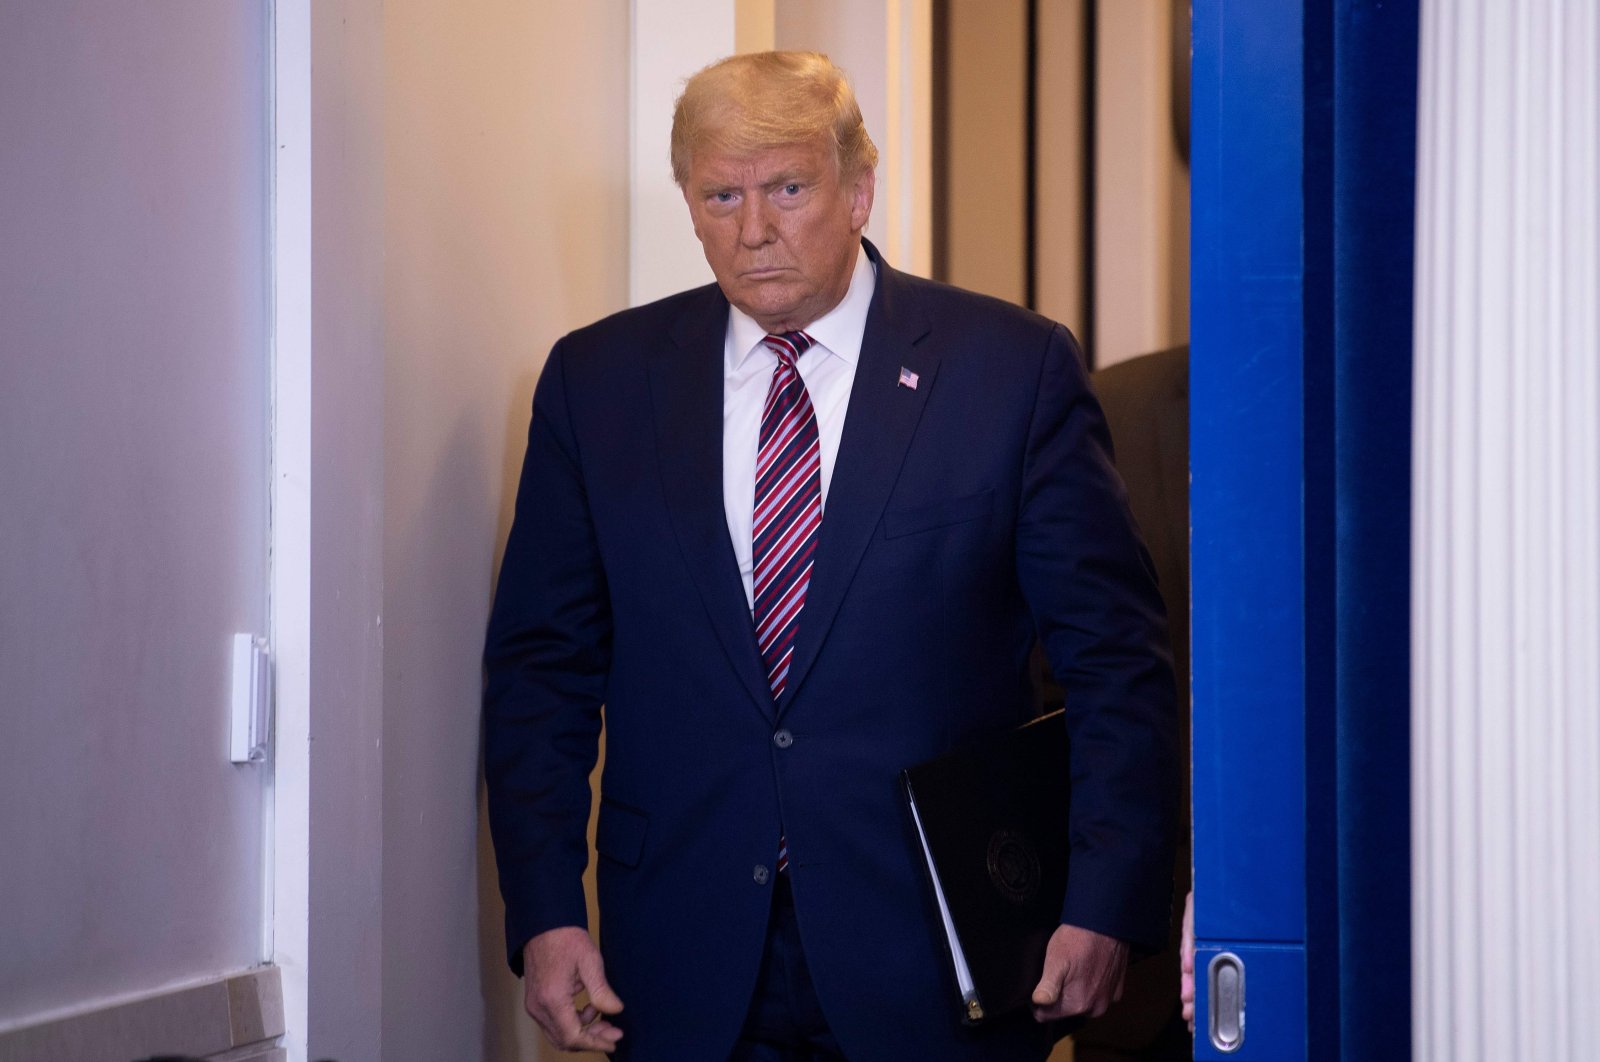 U.S. President Donald Trump arrives to speak in the Brady Briefing Room at the White House, Washington, D.C., Nov. 5, 2020. (AFP Photo)